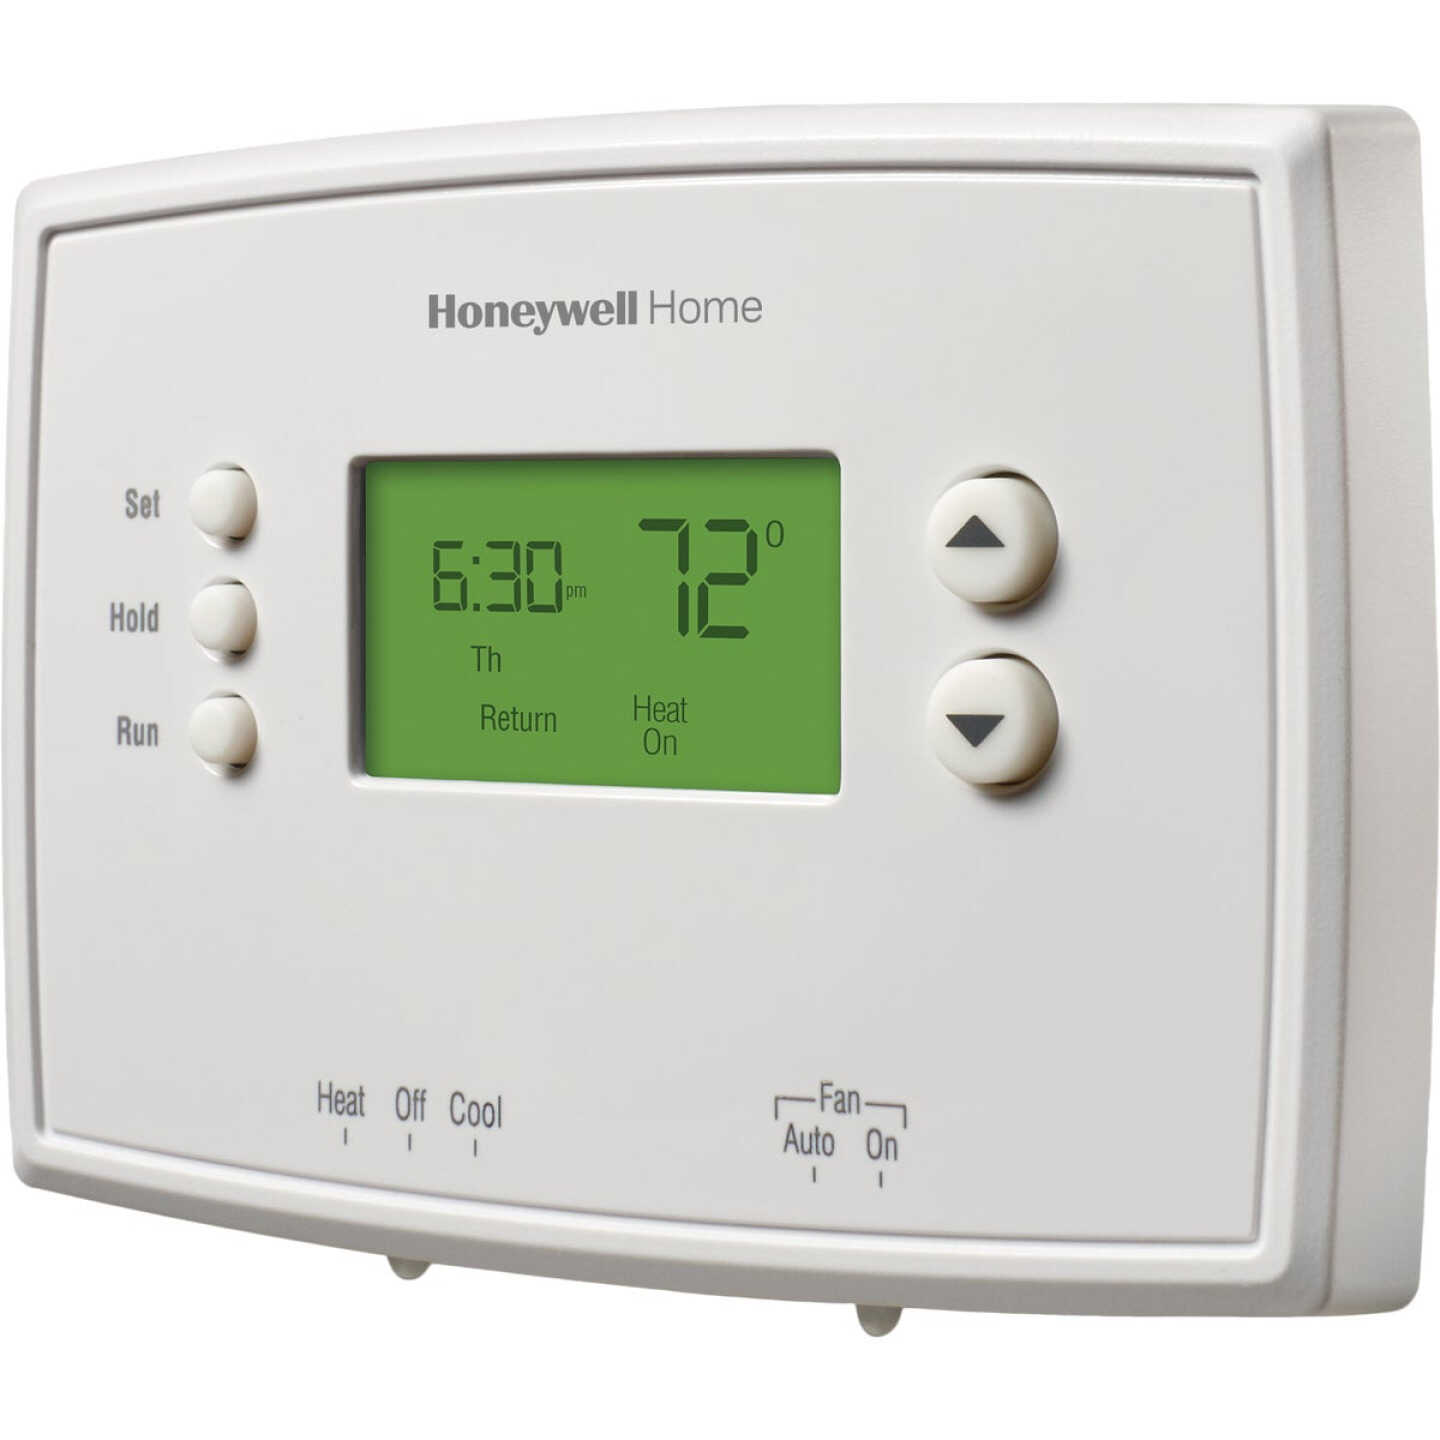 Honeywell Home 5-2 Day Programmable White Digital Thermostat Image 2